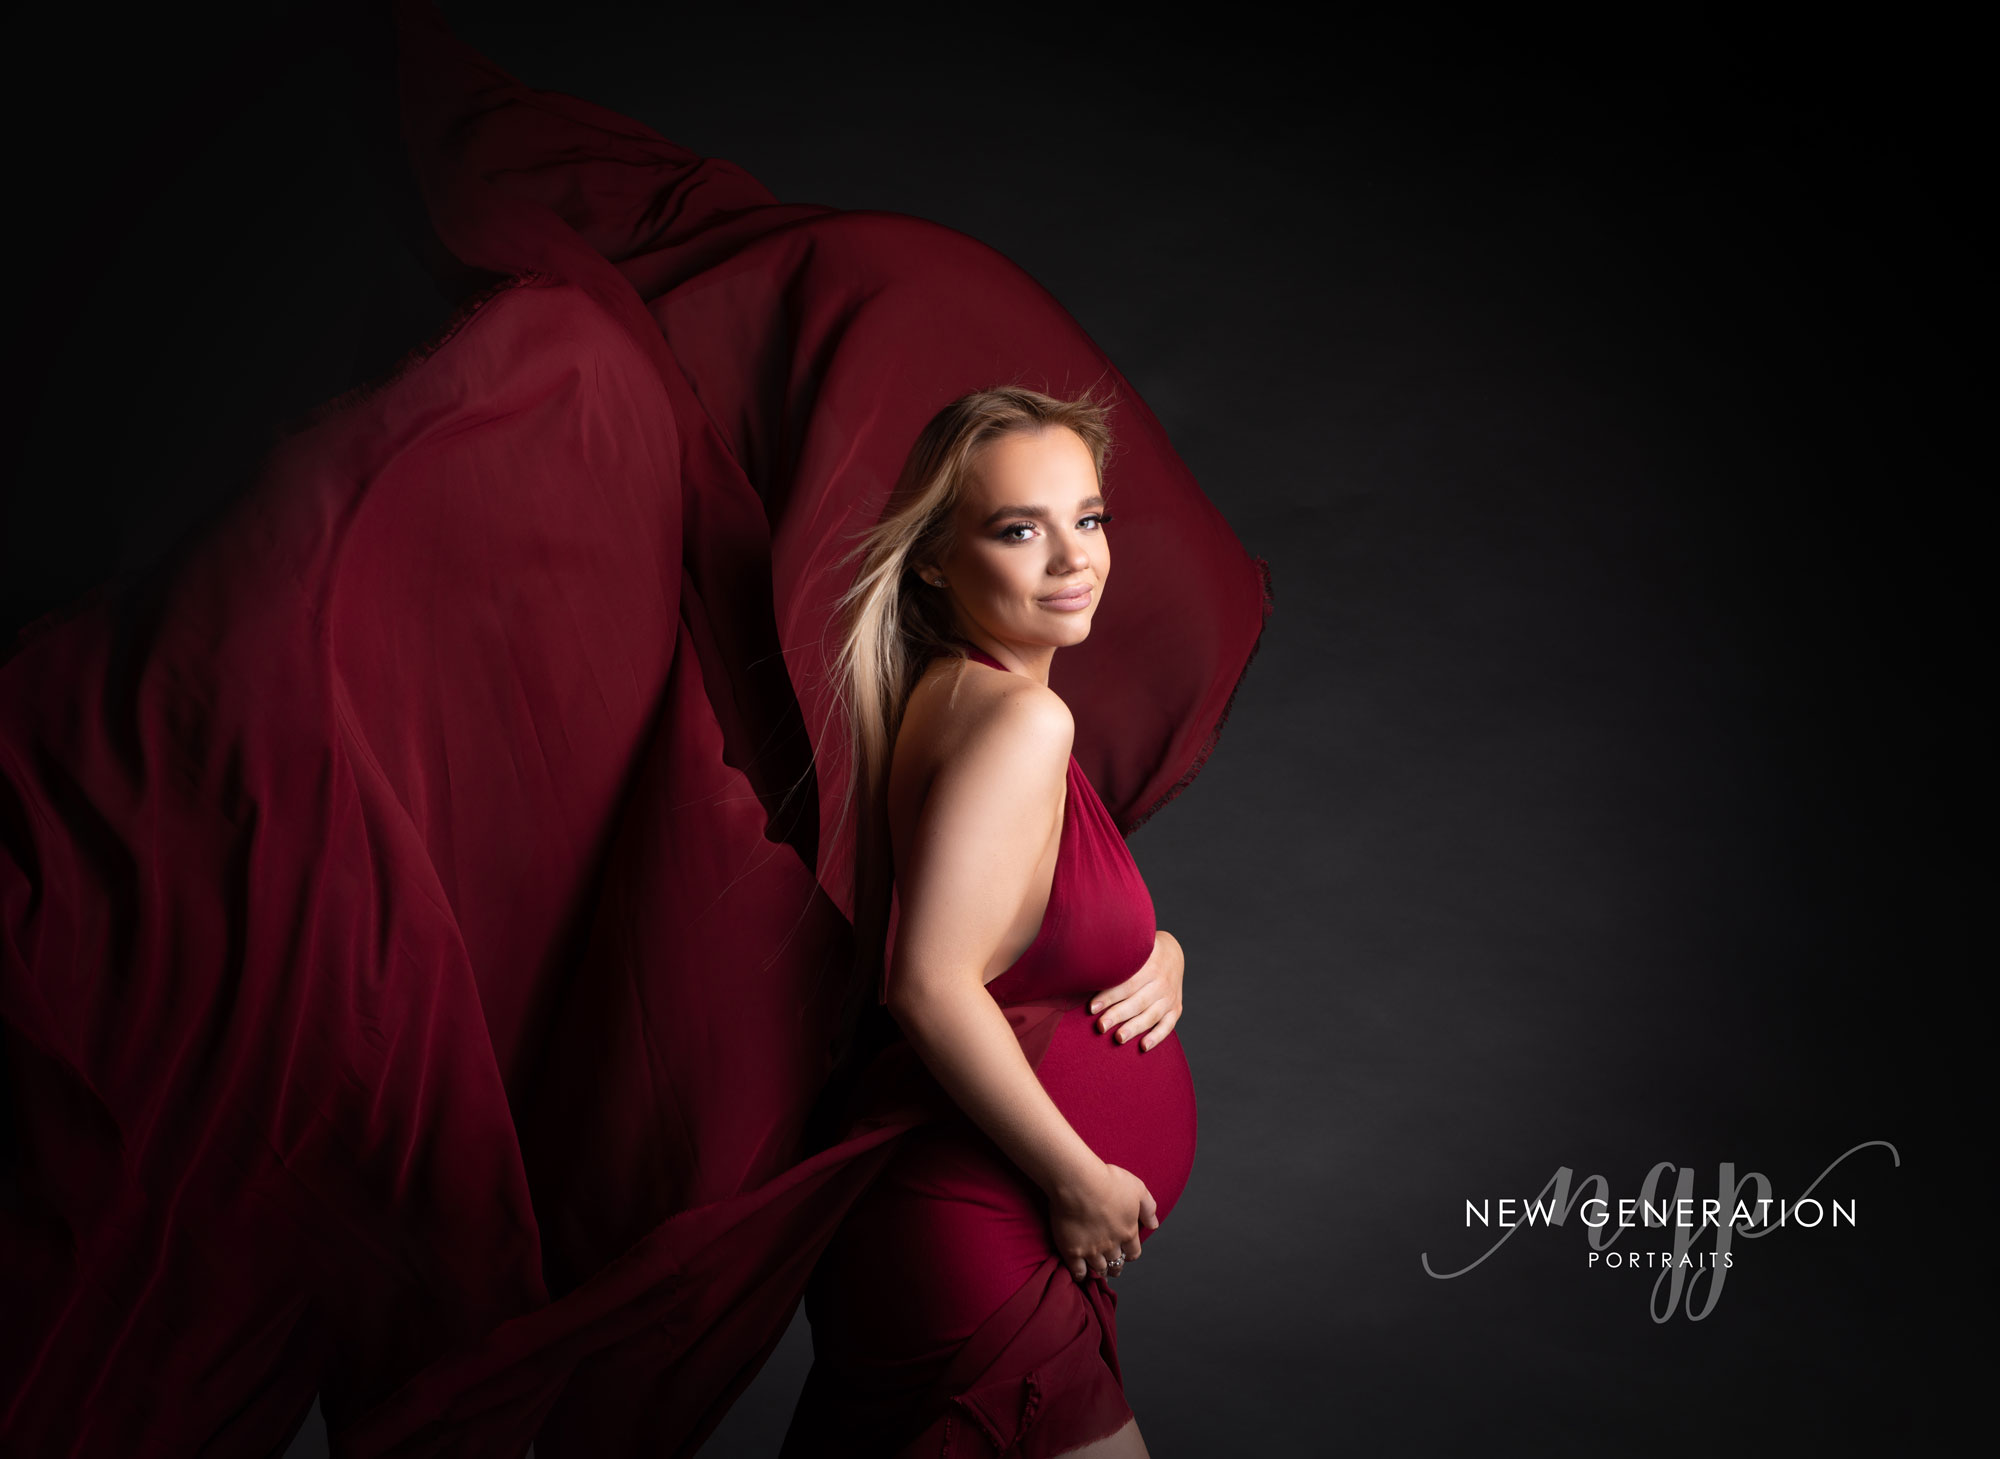 Pregnant lady in claret coloured dress with wind through her hair at New Generation Portraits Ltd